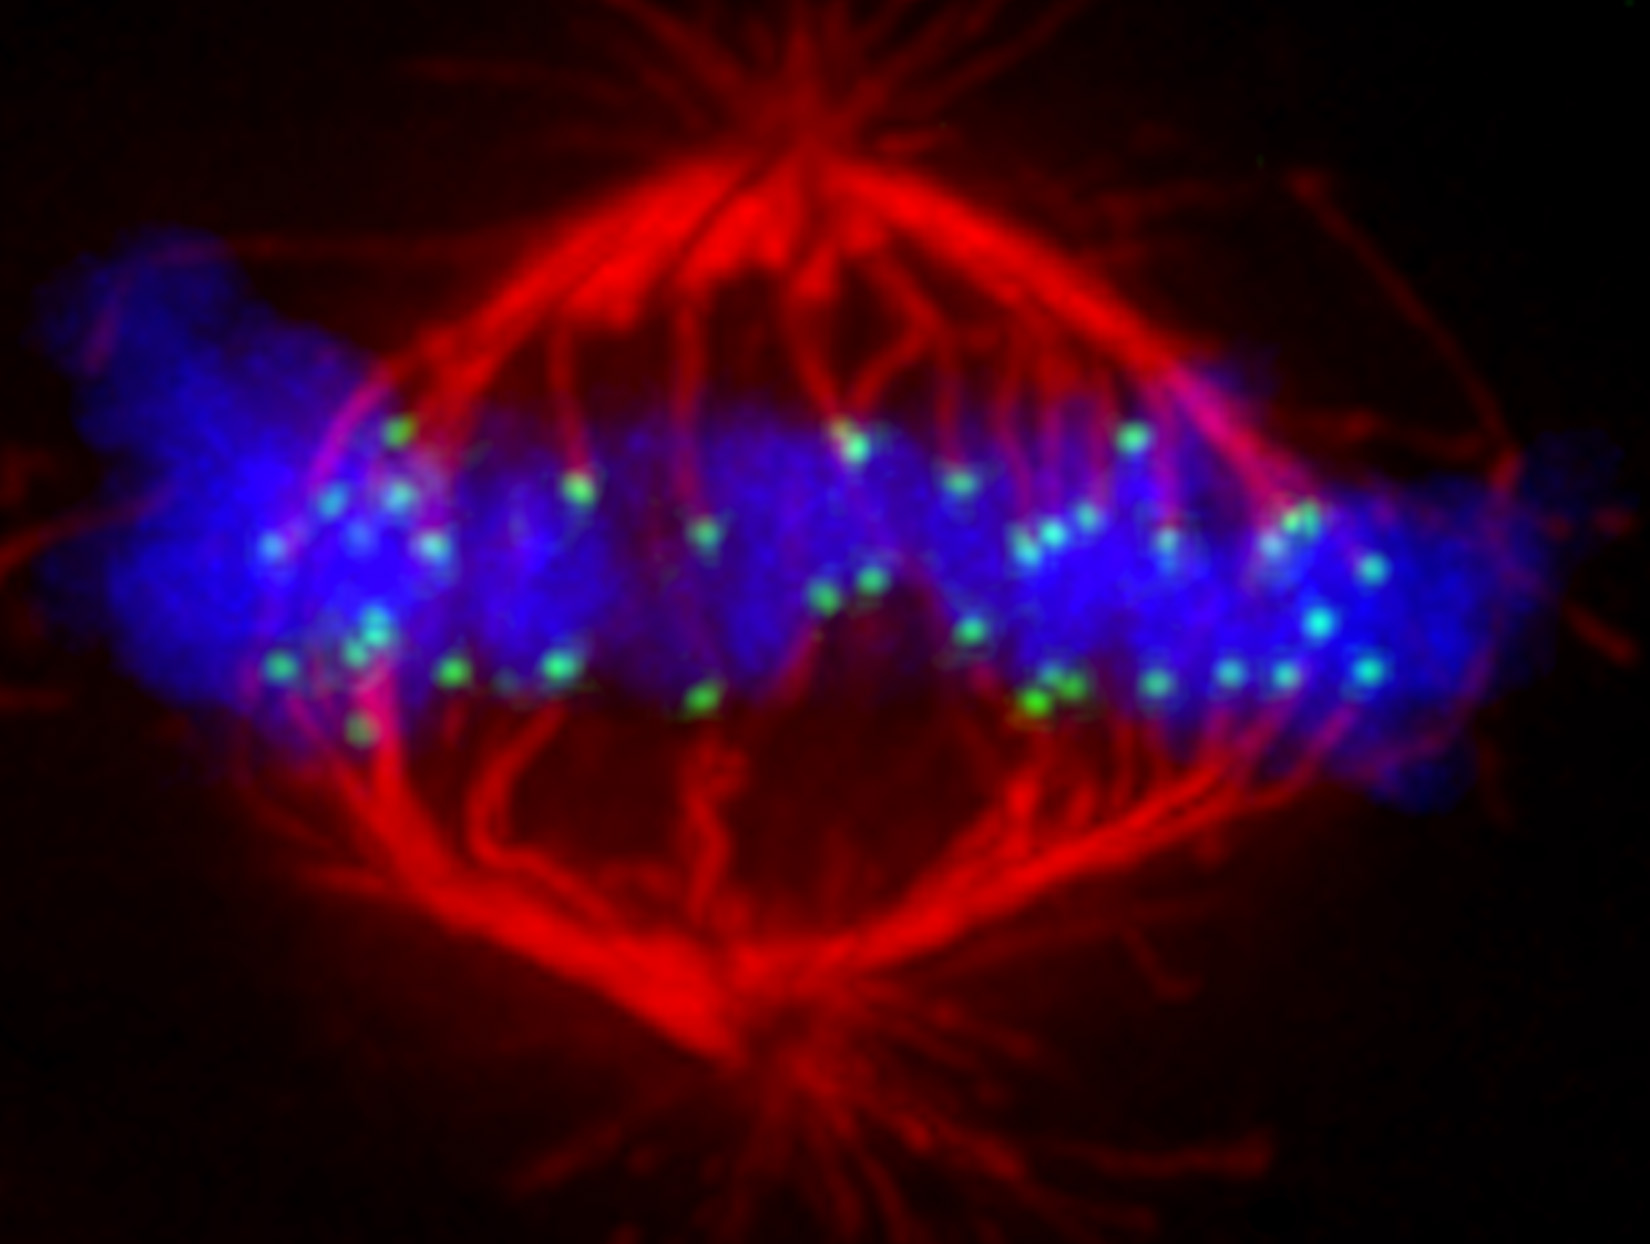 Centromere connections: A human cell undergoing cell division where the goal is to align duplicated chromosomes (blue) and deliver a perfect set to the two new “daughter cells.” The chromosomes are attached to cables, called microtubules (red). The attachment site is the centromere (green). HACs are inherited alongside the natural set of chromosomes in dividing human cells.